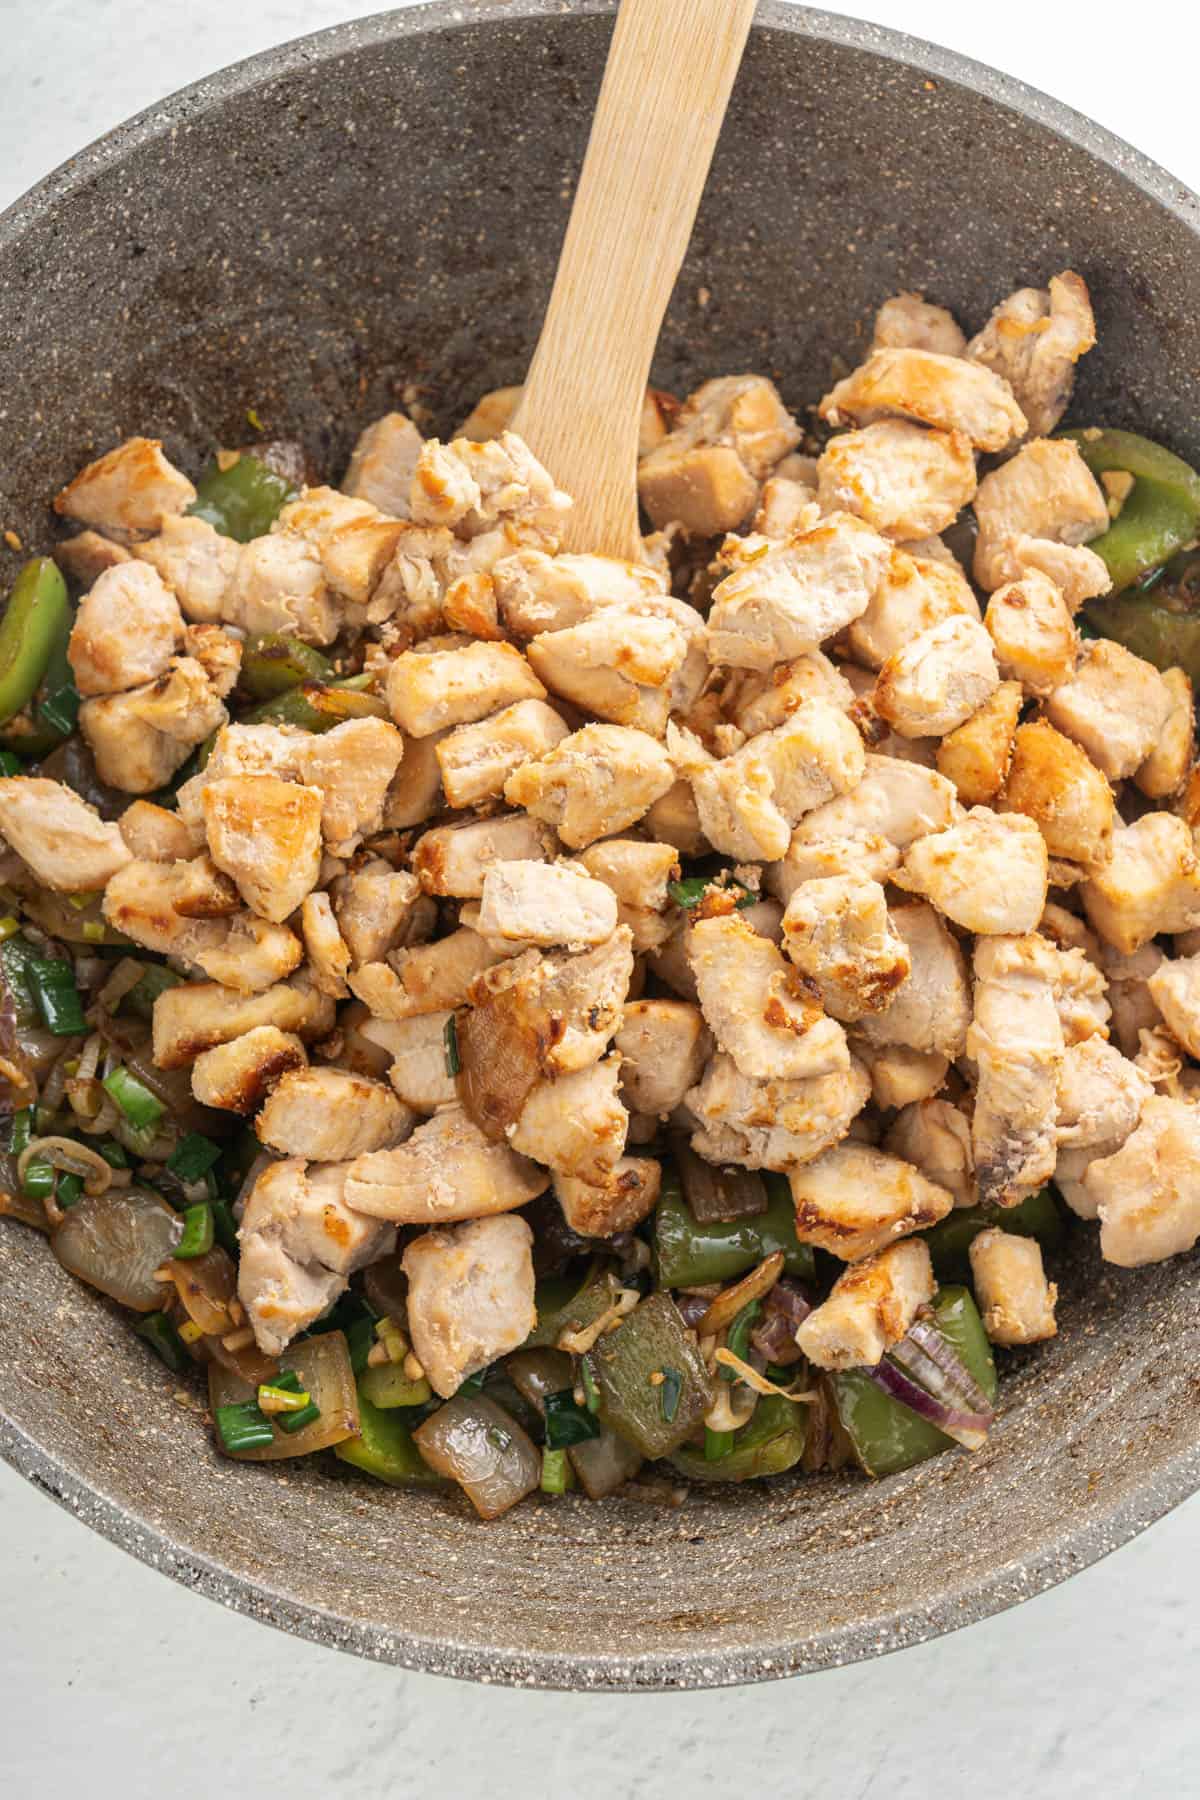 Adding cooked chicken pieces to softened vegetables.